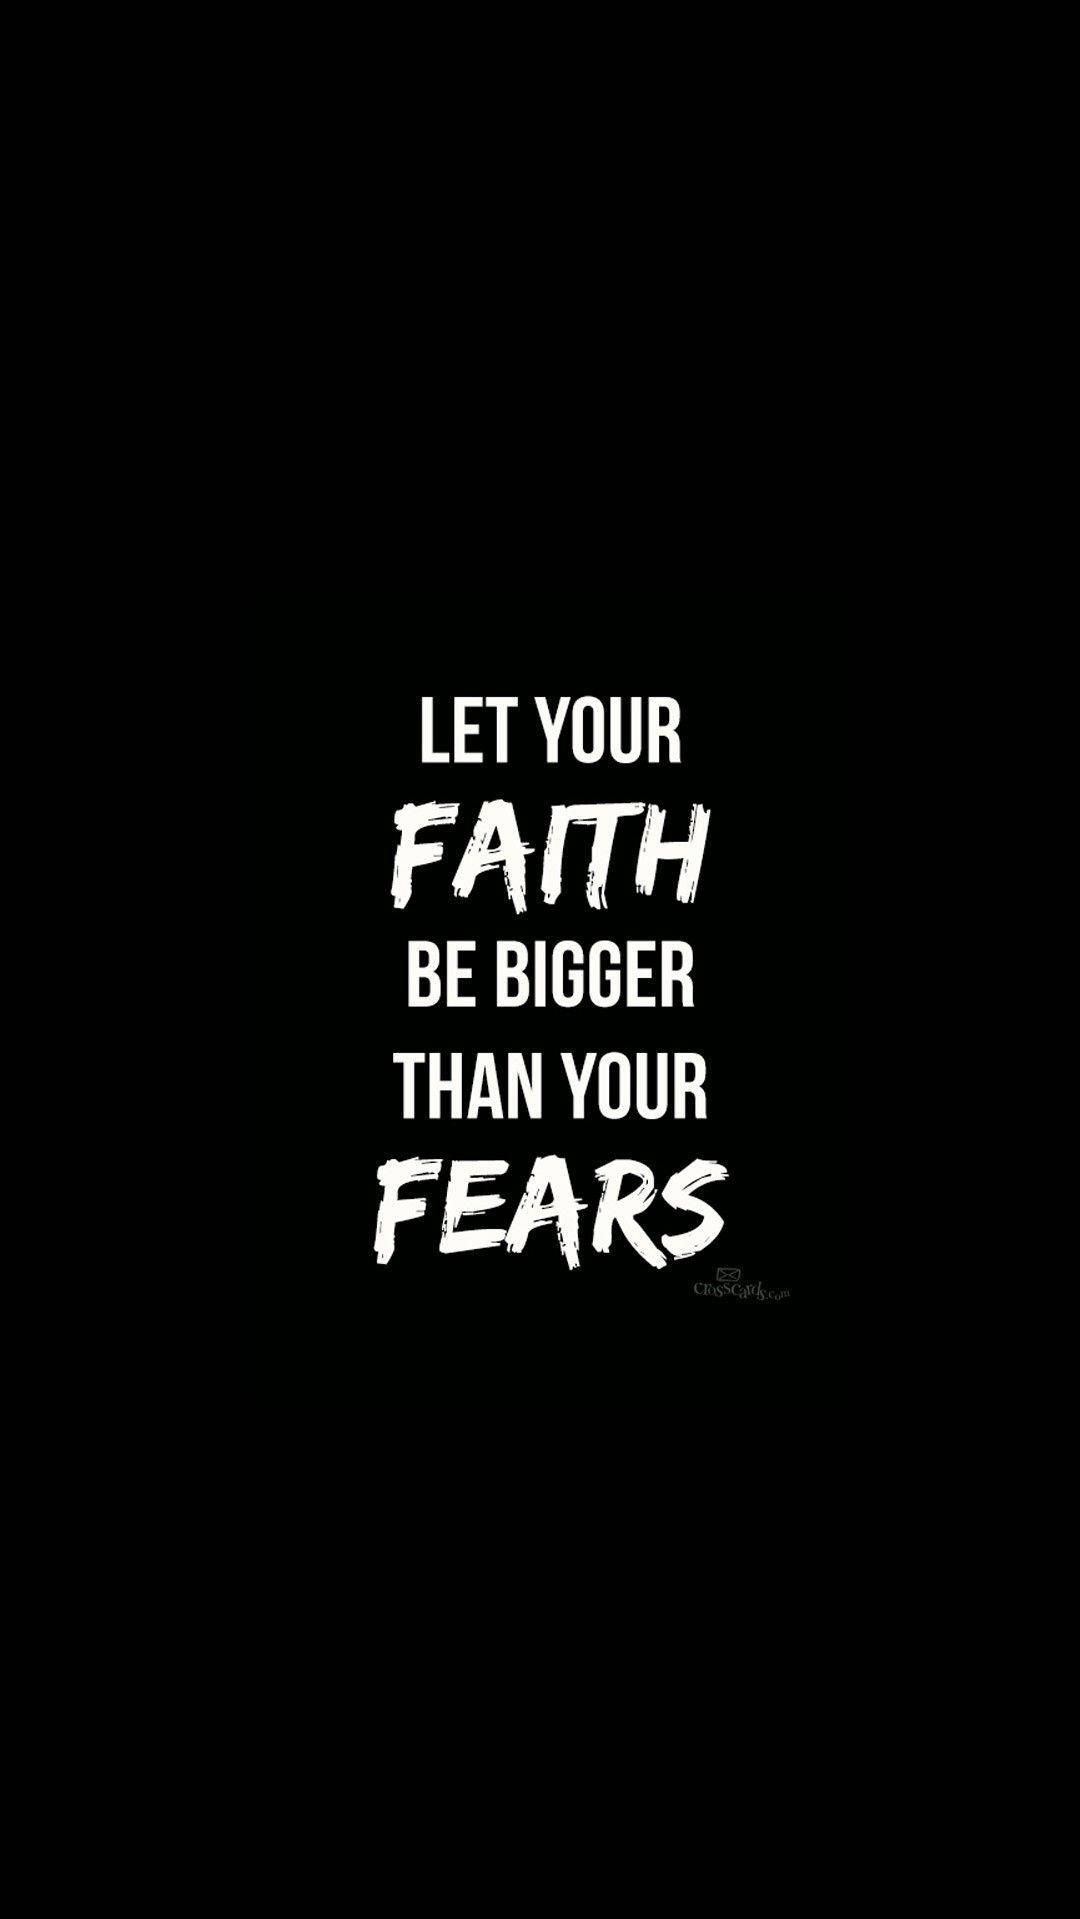 Let Your Faith Be Bigger Than Fears Wallpaper Mobcup